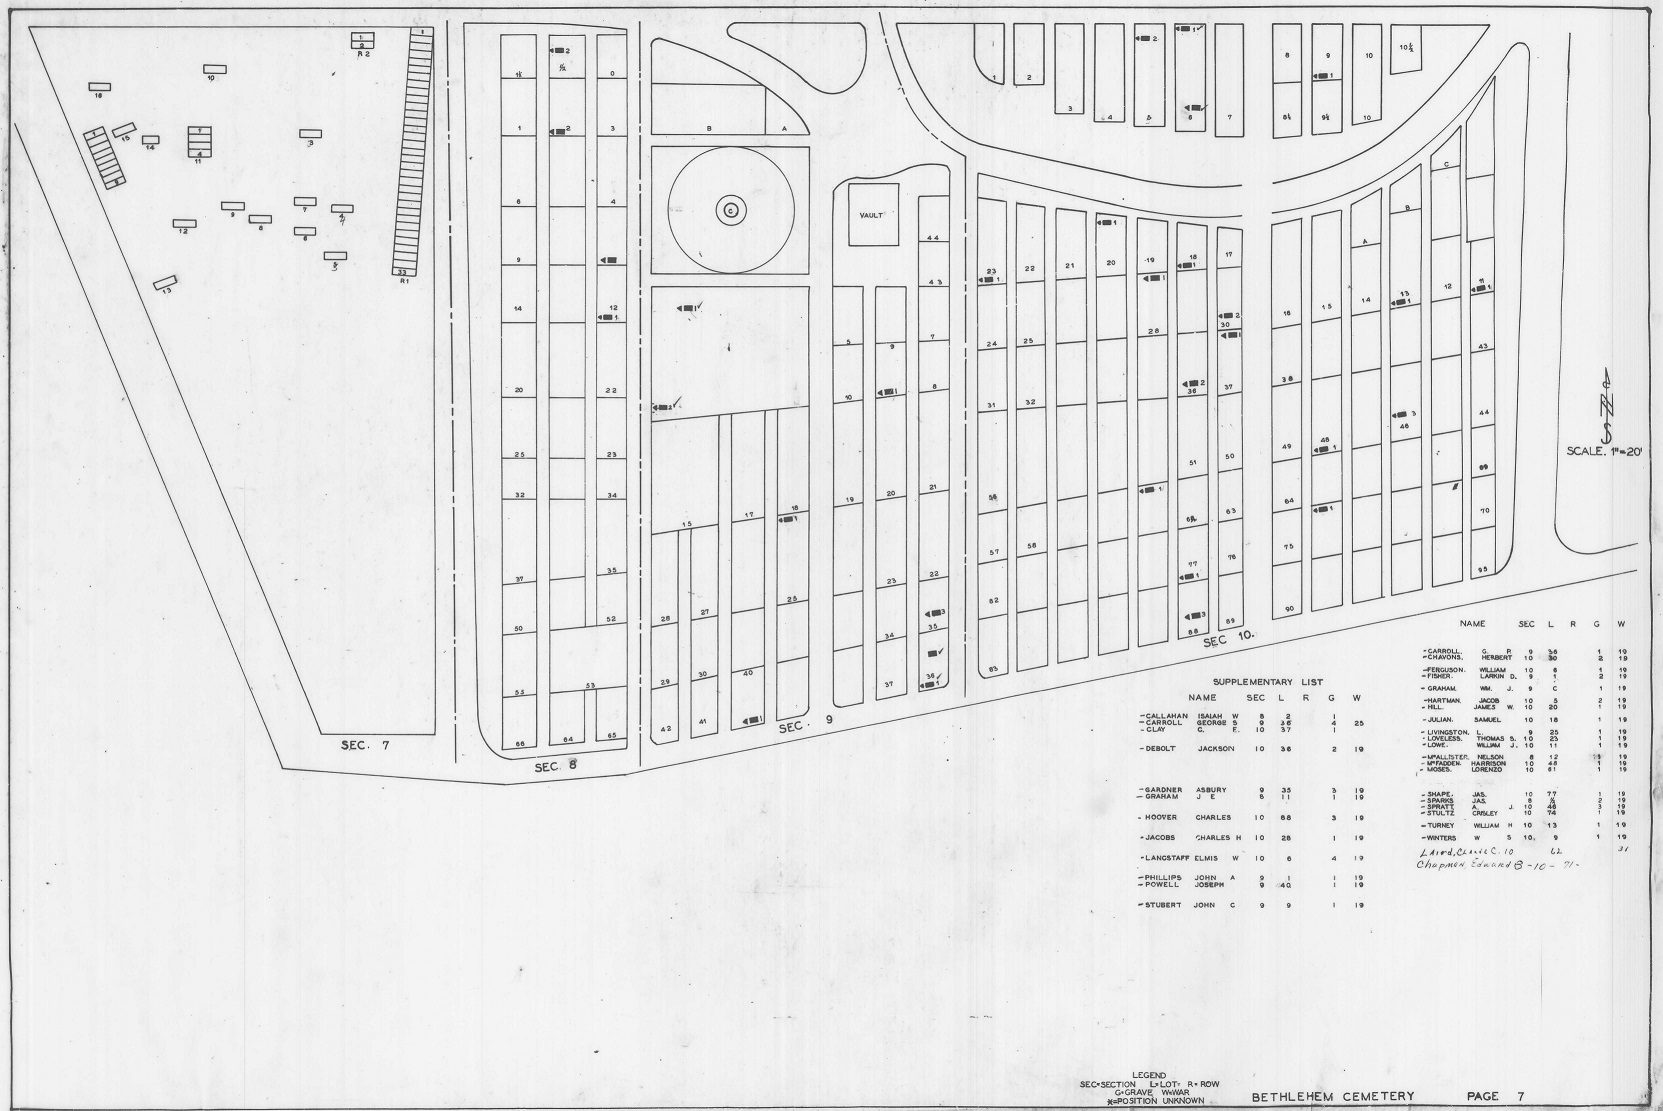 WPA Veteran Grave Registry Map for Sections 7, 8, 9, and 10 of Claibourne Cemetery (aka Bethlehem Cemetery), Claibourne Township, Union County, Ohio. Micheal Brucker’s gravestone was recorded in Section 7 based on a 1989 published inventory of the cemetery.